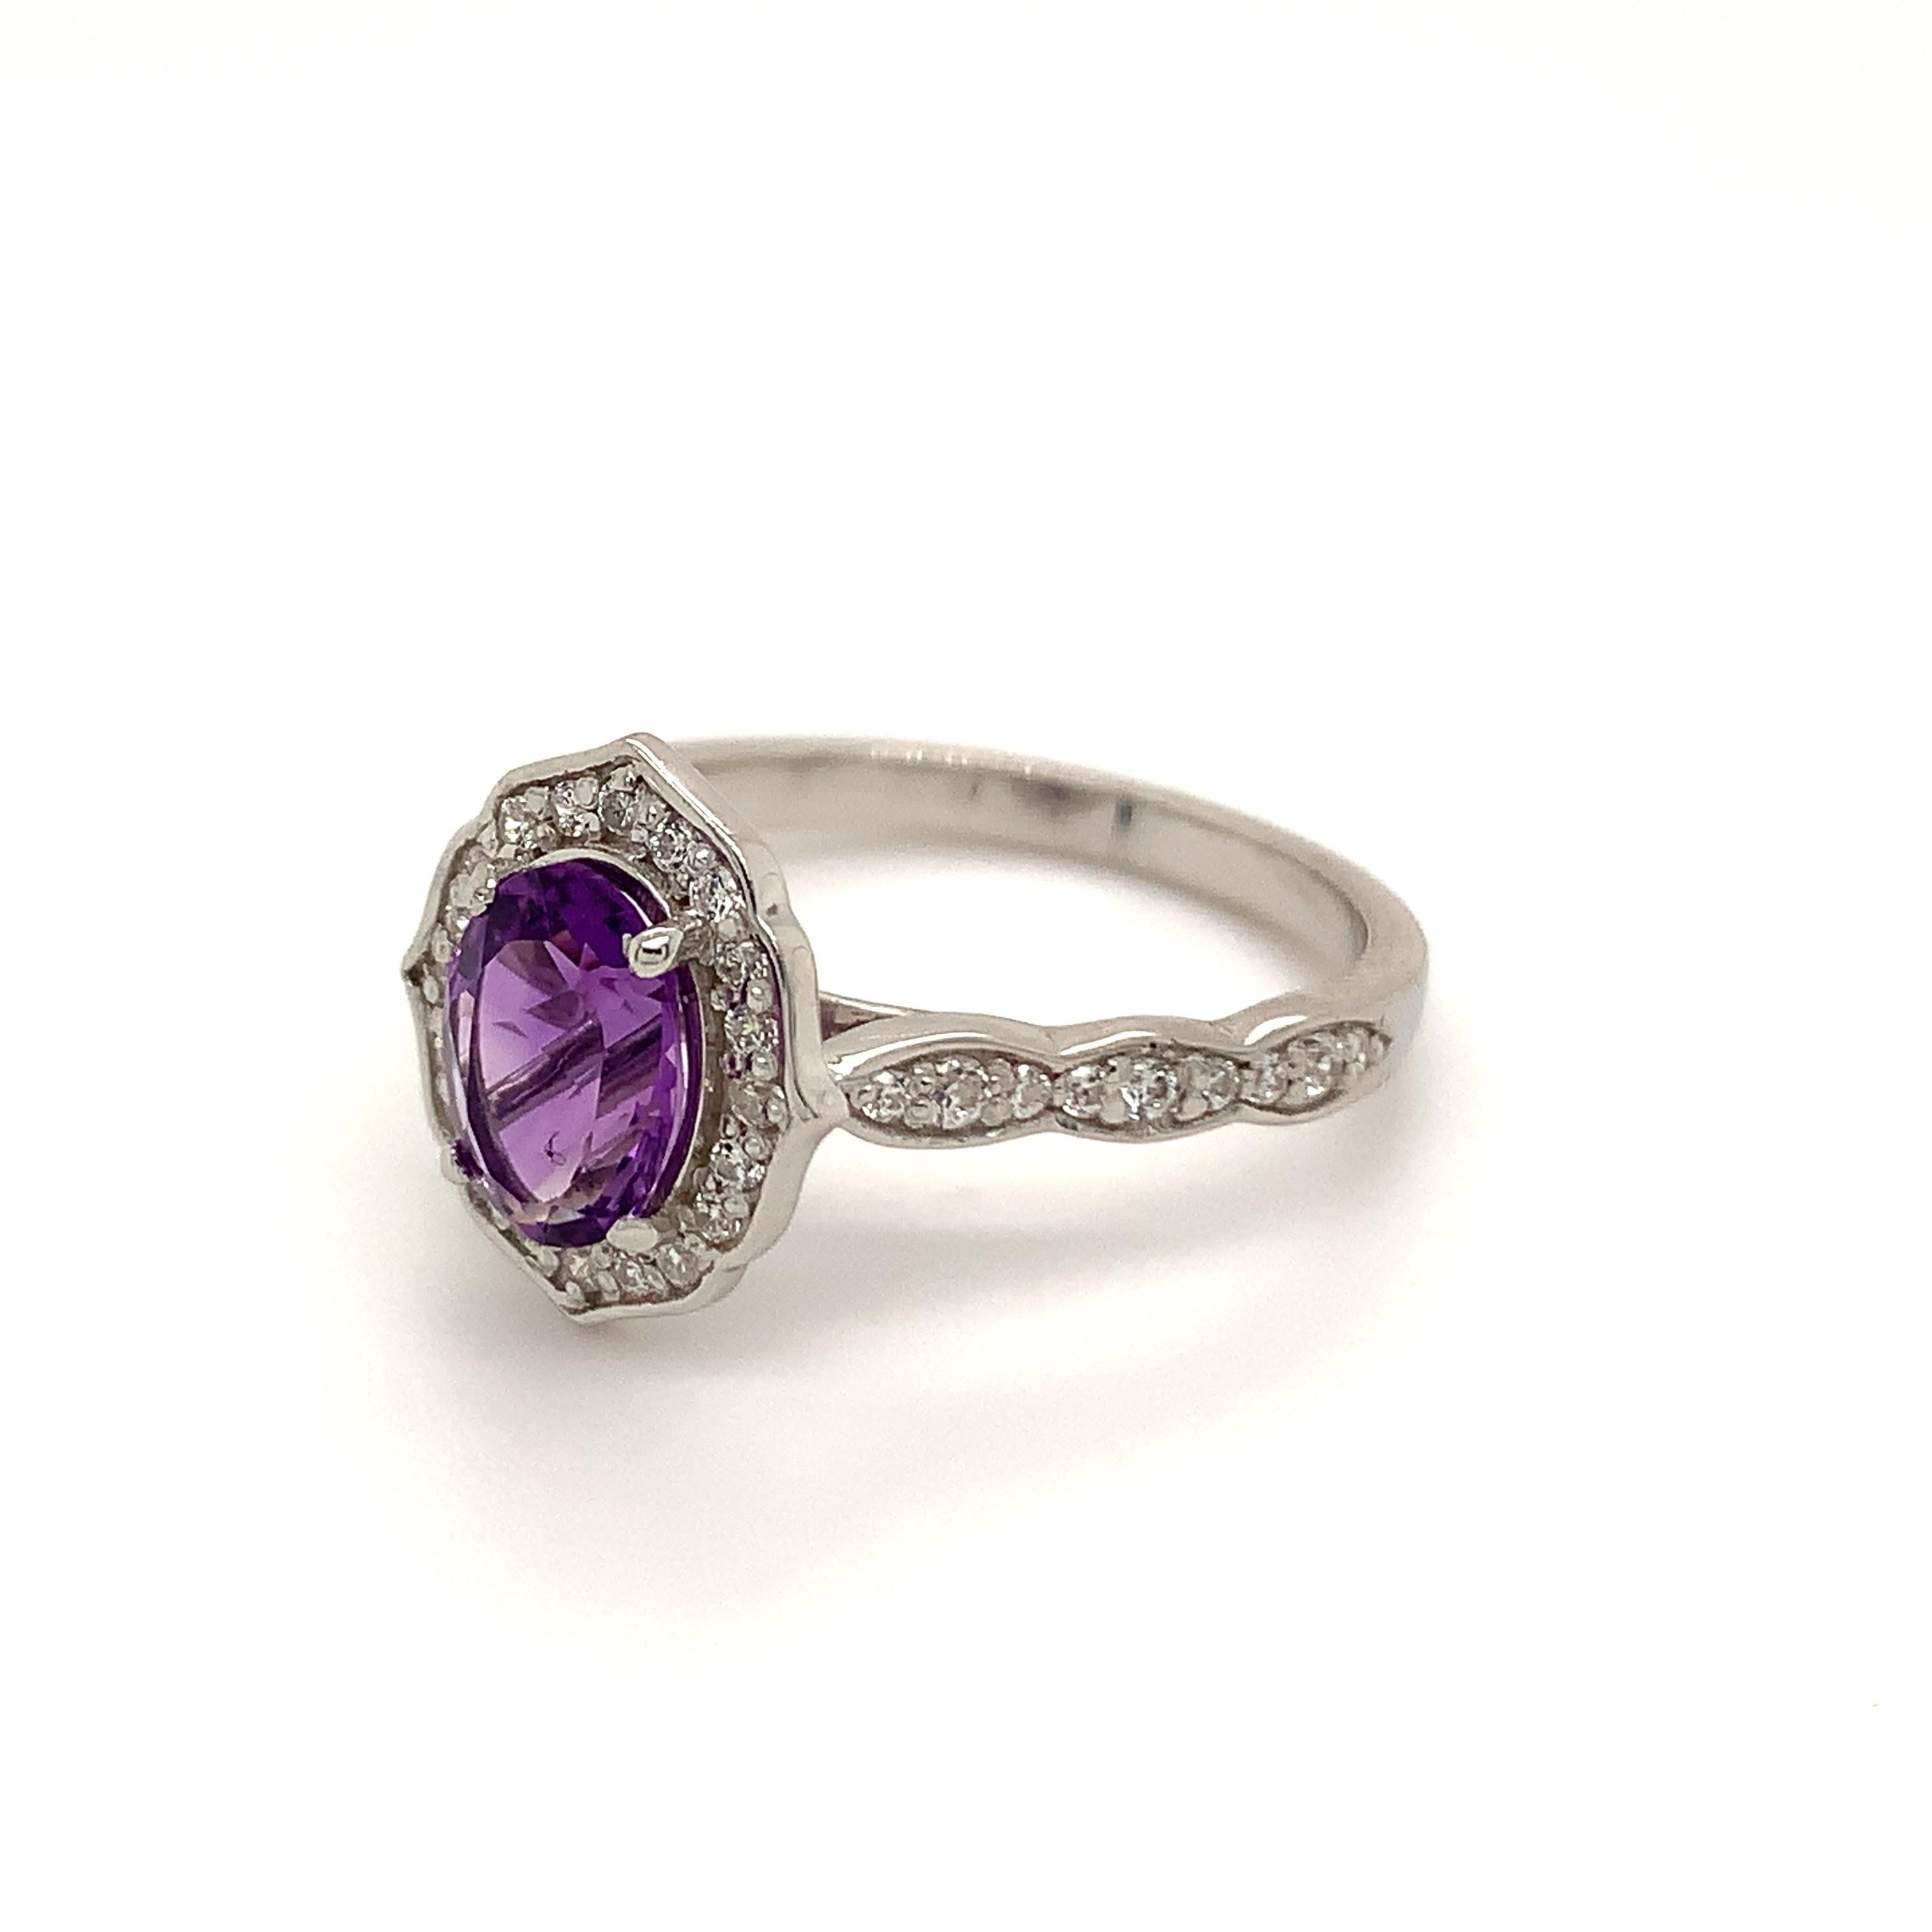 Oval Shape Amethyst Gemstone beautifully crafted with CZ in a Ring. A fiery Violet Color February Birthstone. For a special occasion like Engagement or Proposal or may be as a gift for a special person.
